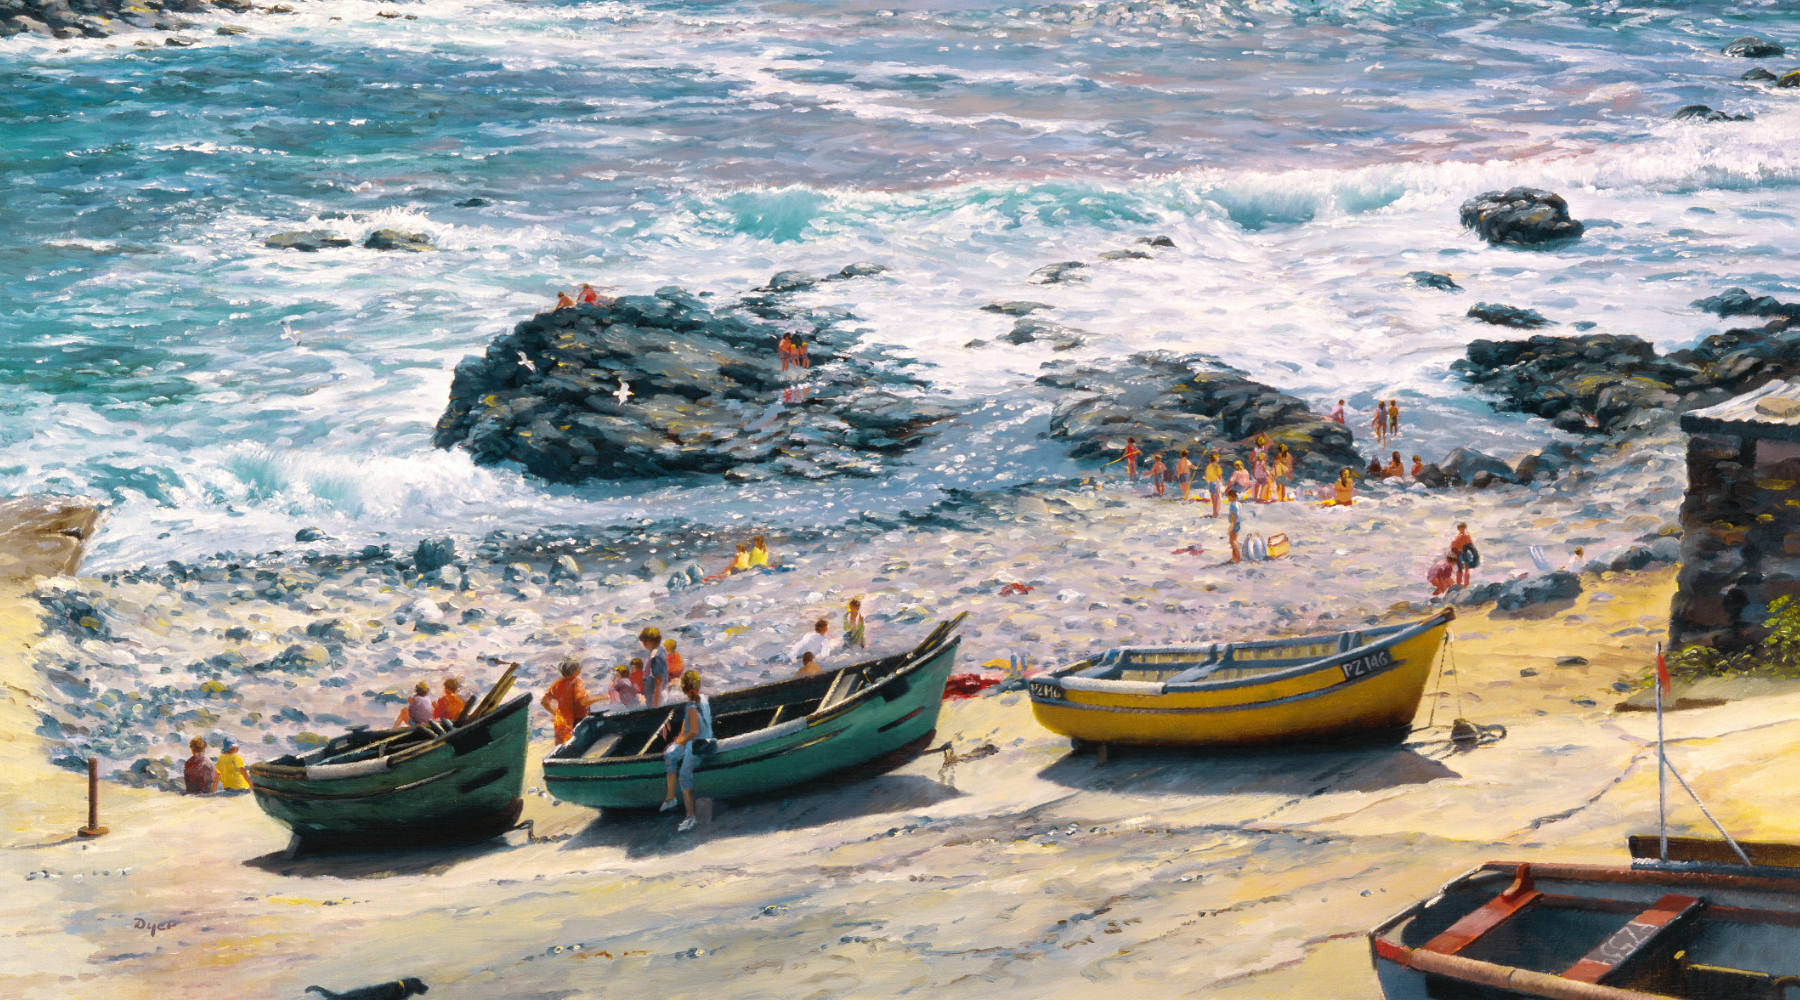 Ted Dyer open edition print of Priests Cove at Cape Cornwall